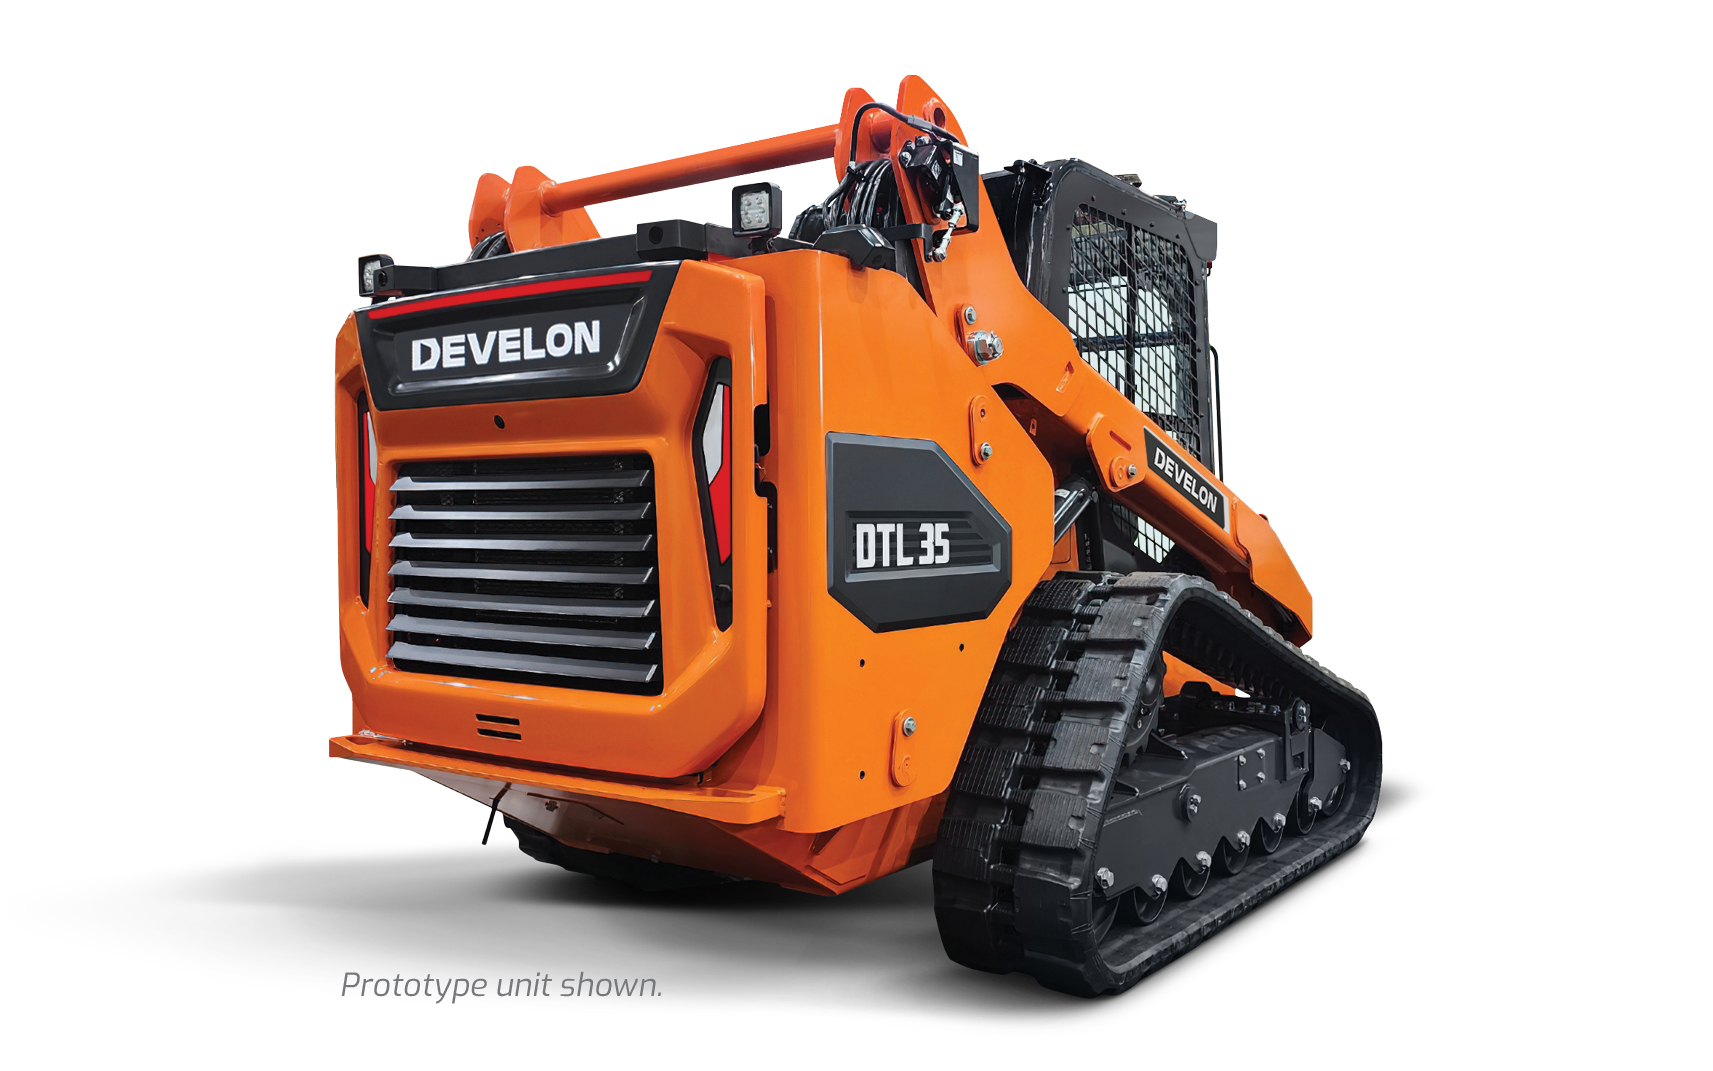 The DEVELON DTL35 compact track loader prototype.